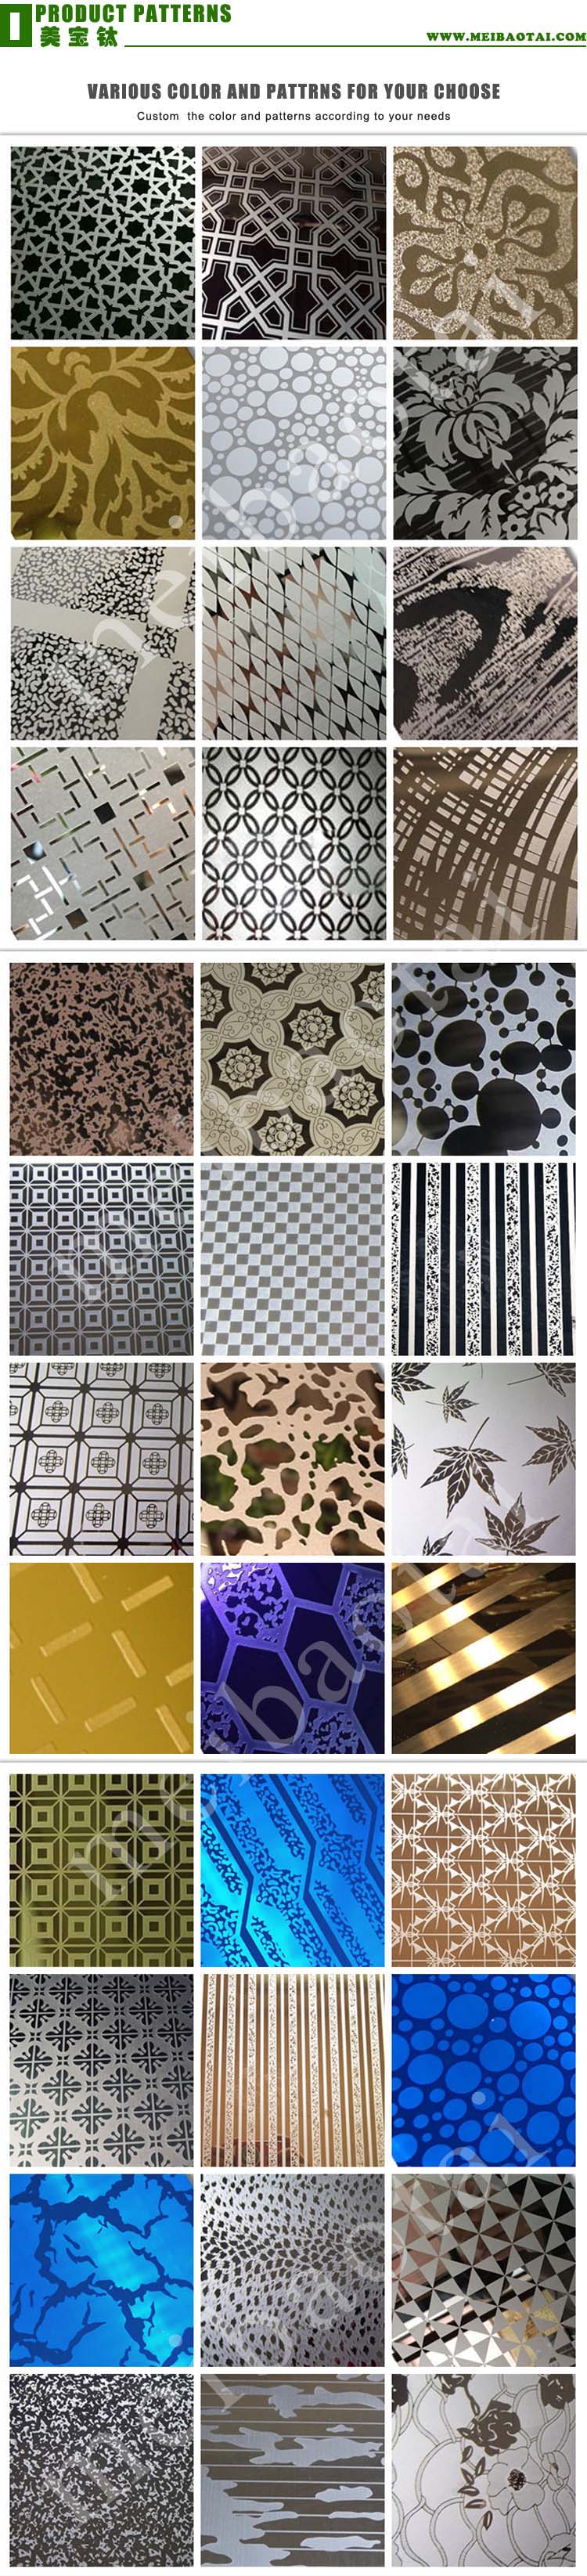 etching_products_patterns